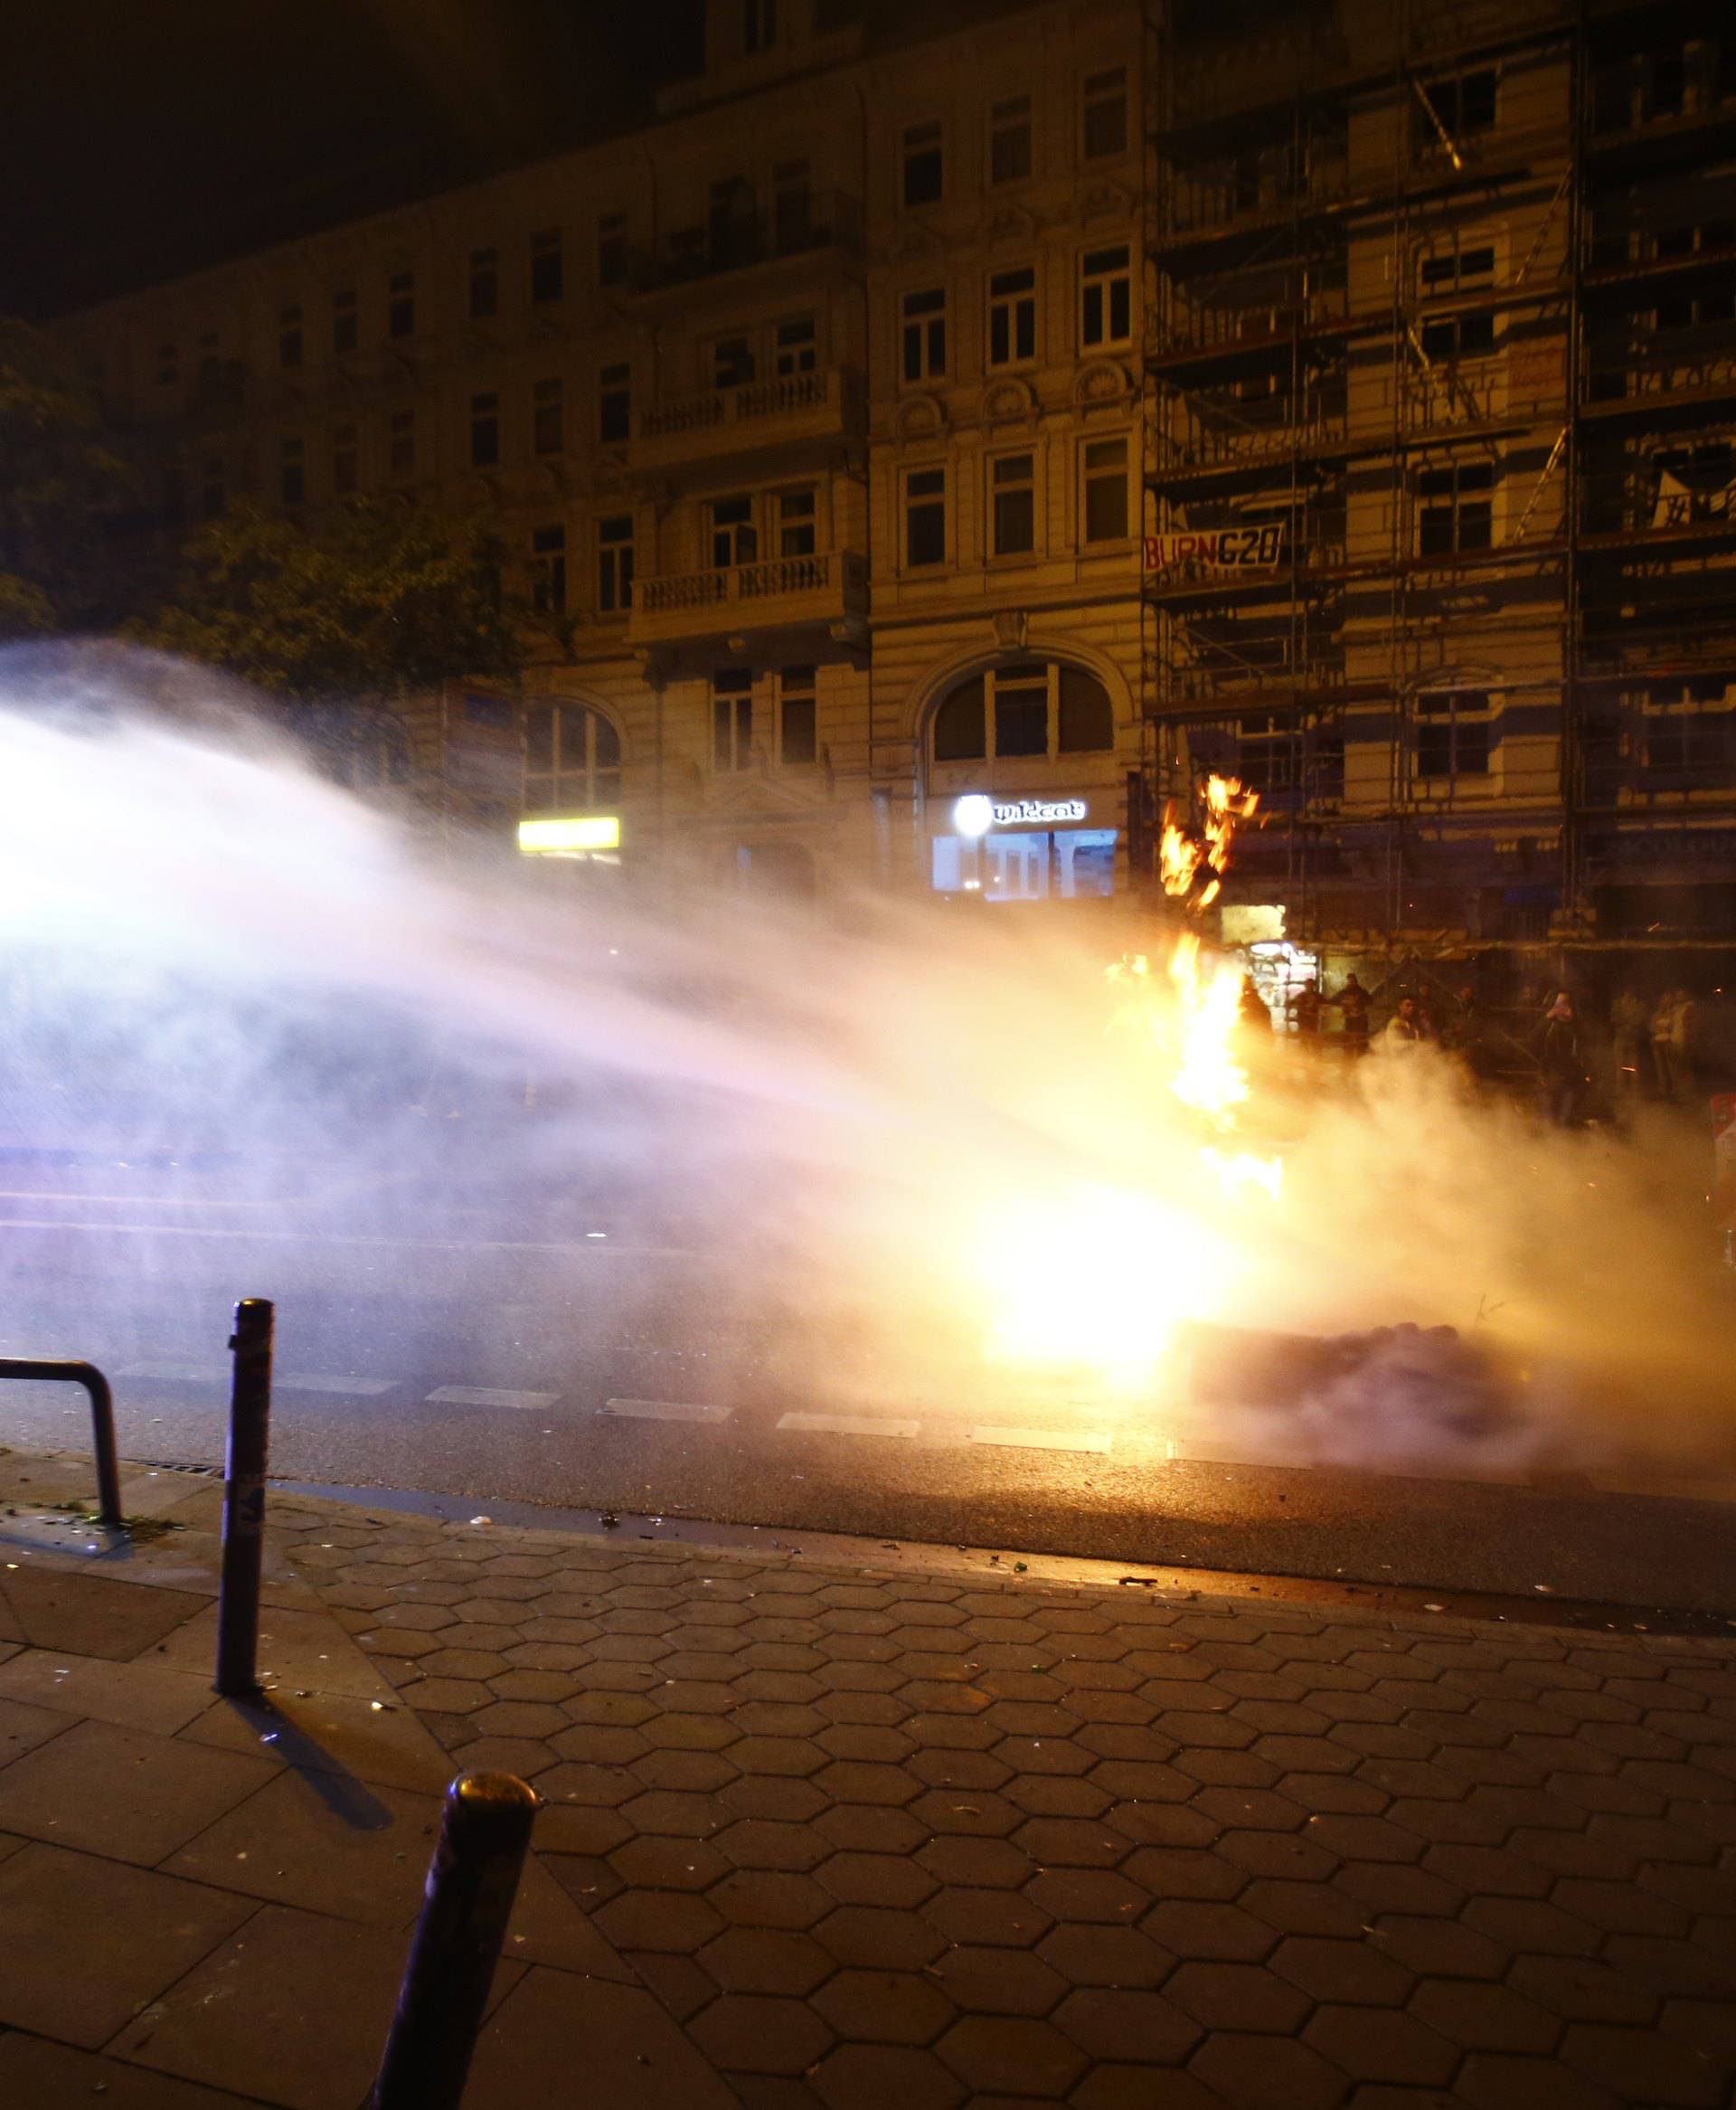 A man takes a picture as police use water cannon during the demonstration at the G20 summit in Hamburg